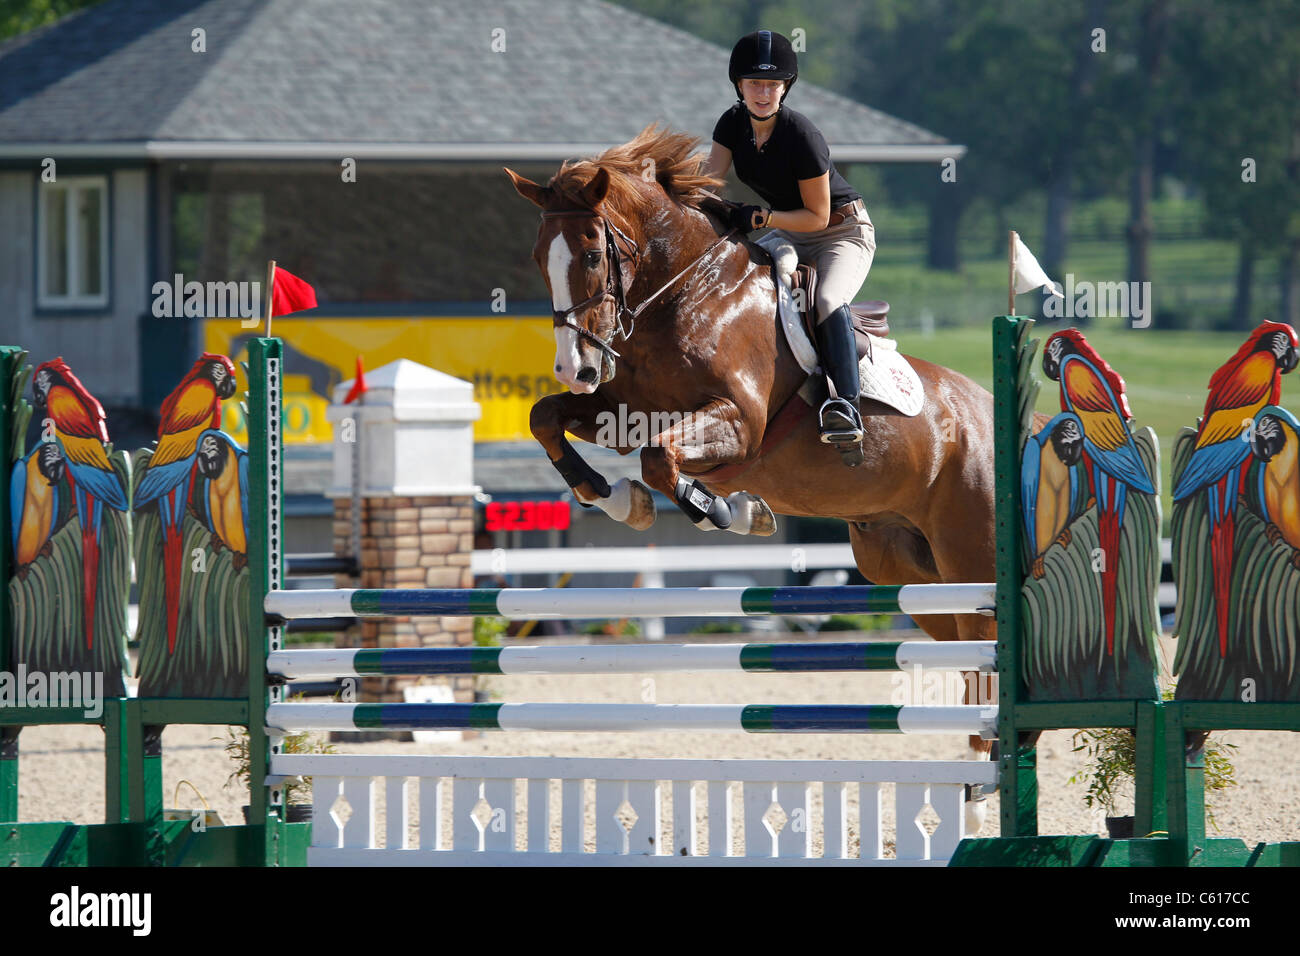 A horse and rider jumping a fence during a horse show. Stock Photo